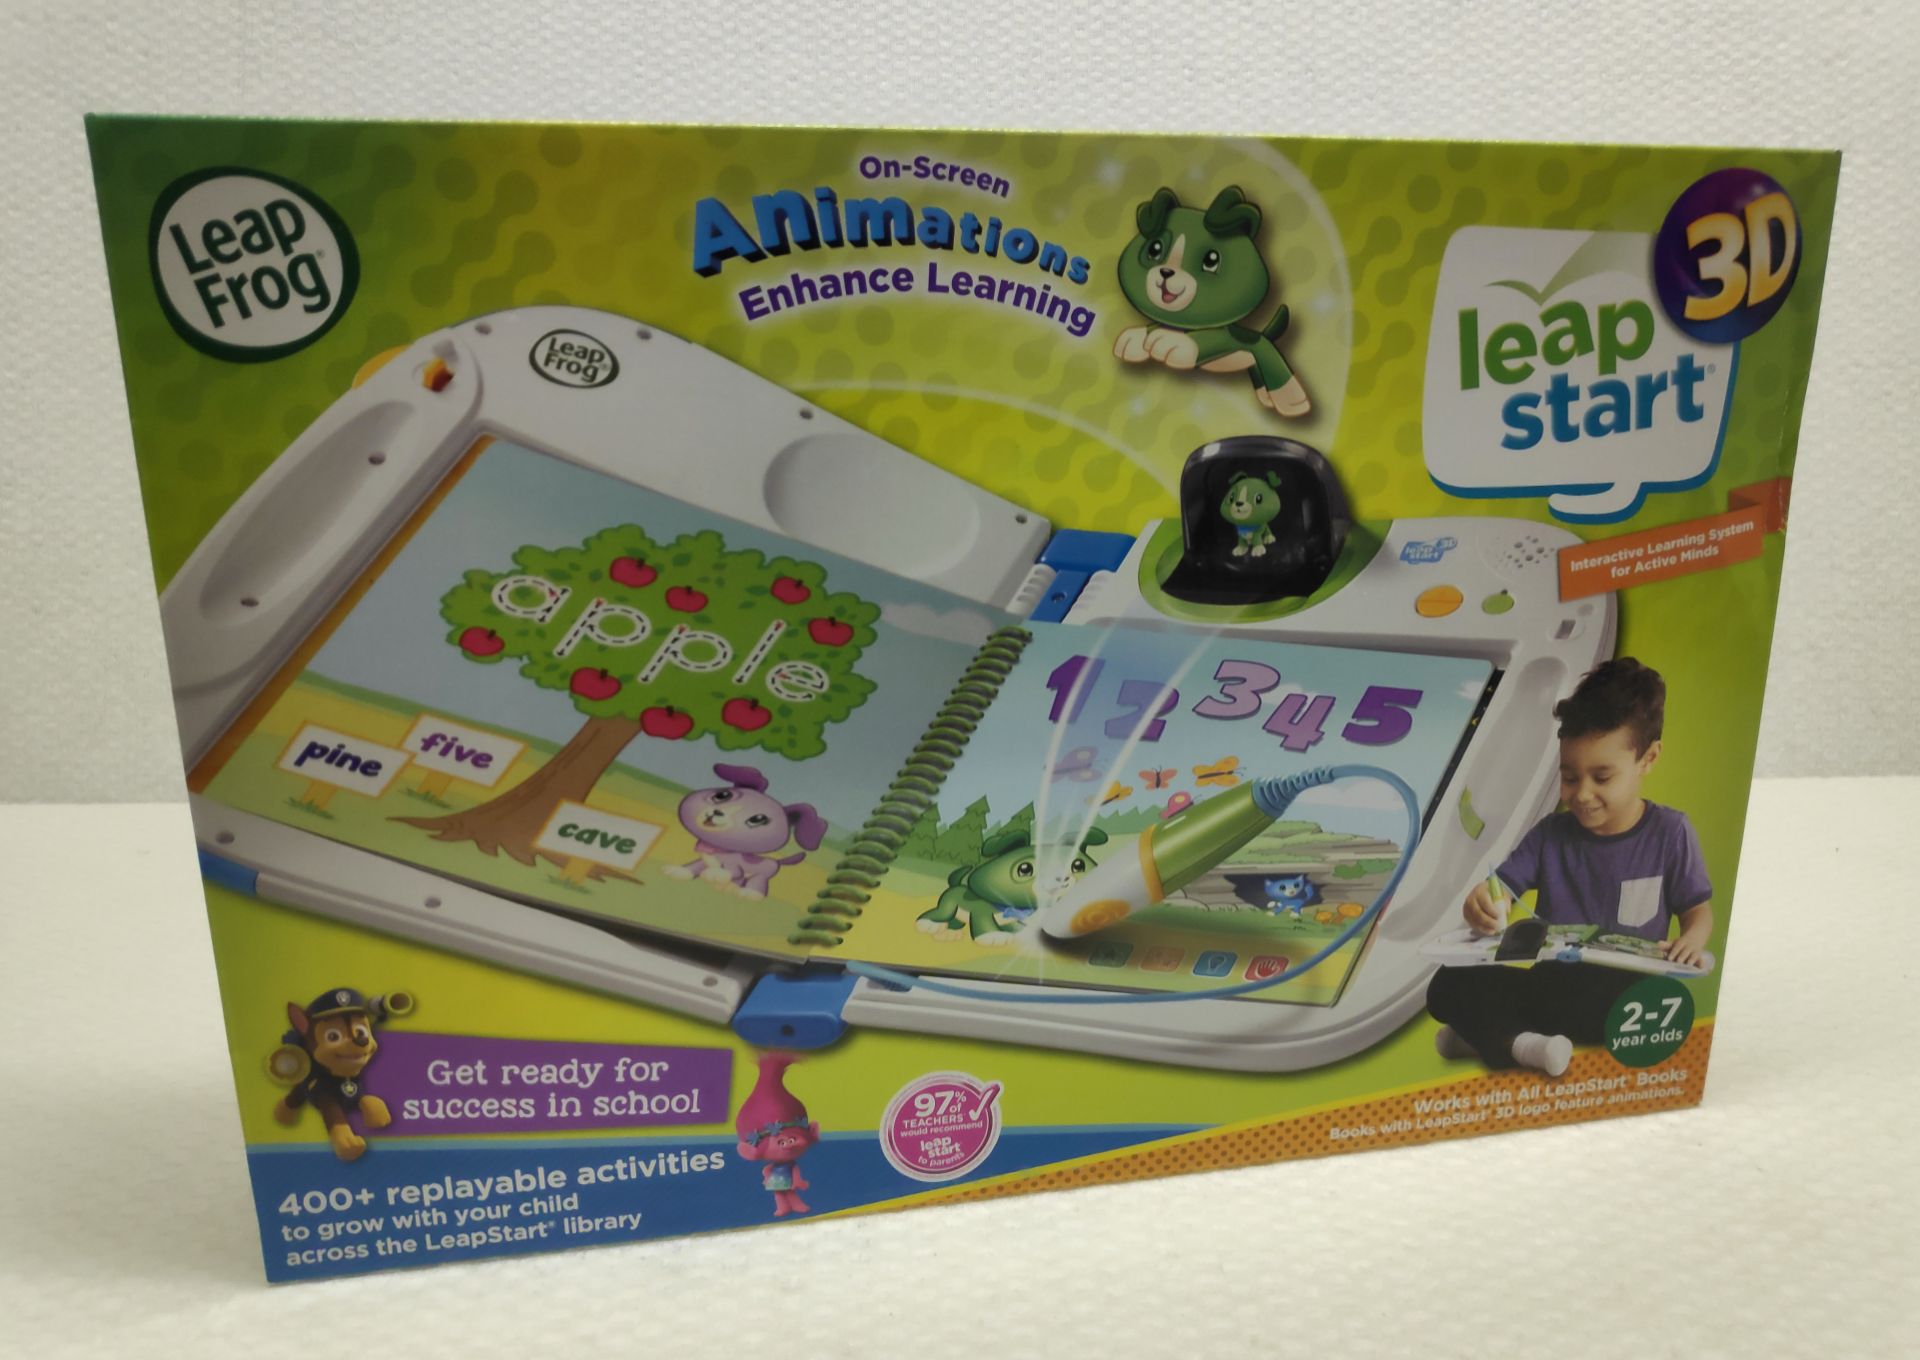 1 x LeapFrog LeapStart 3D Interactive Learing System - New/Boxed